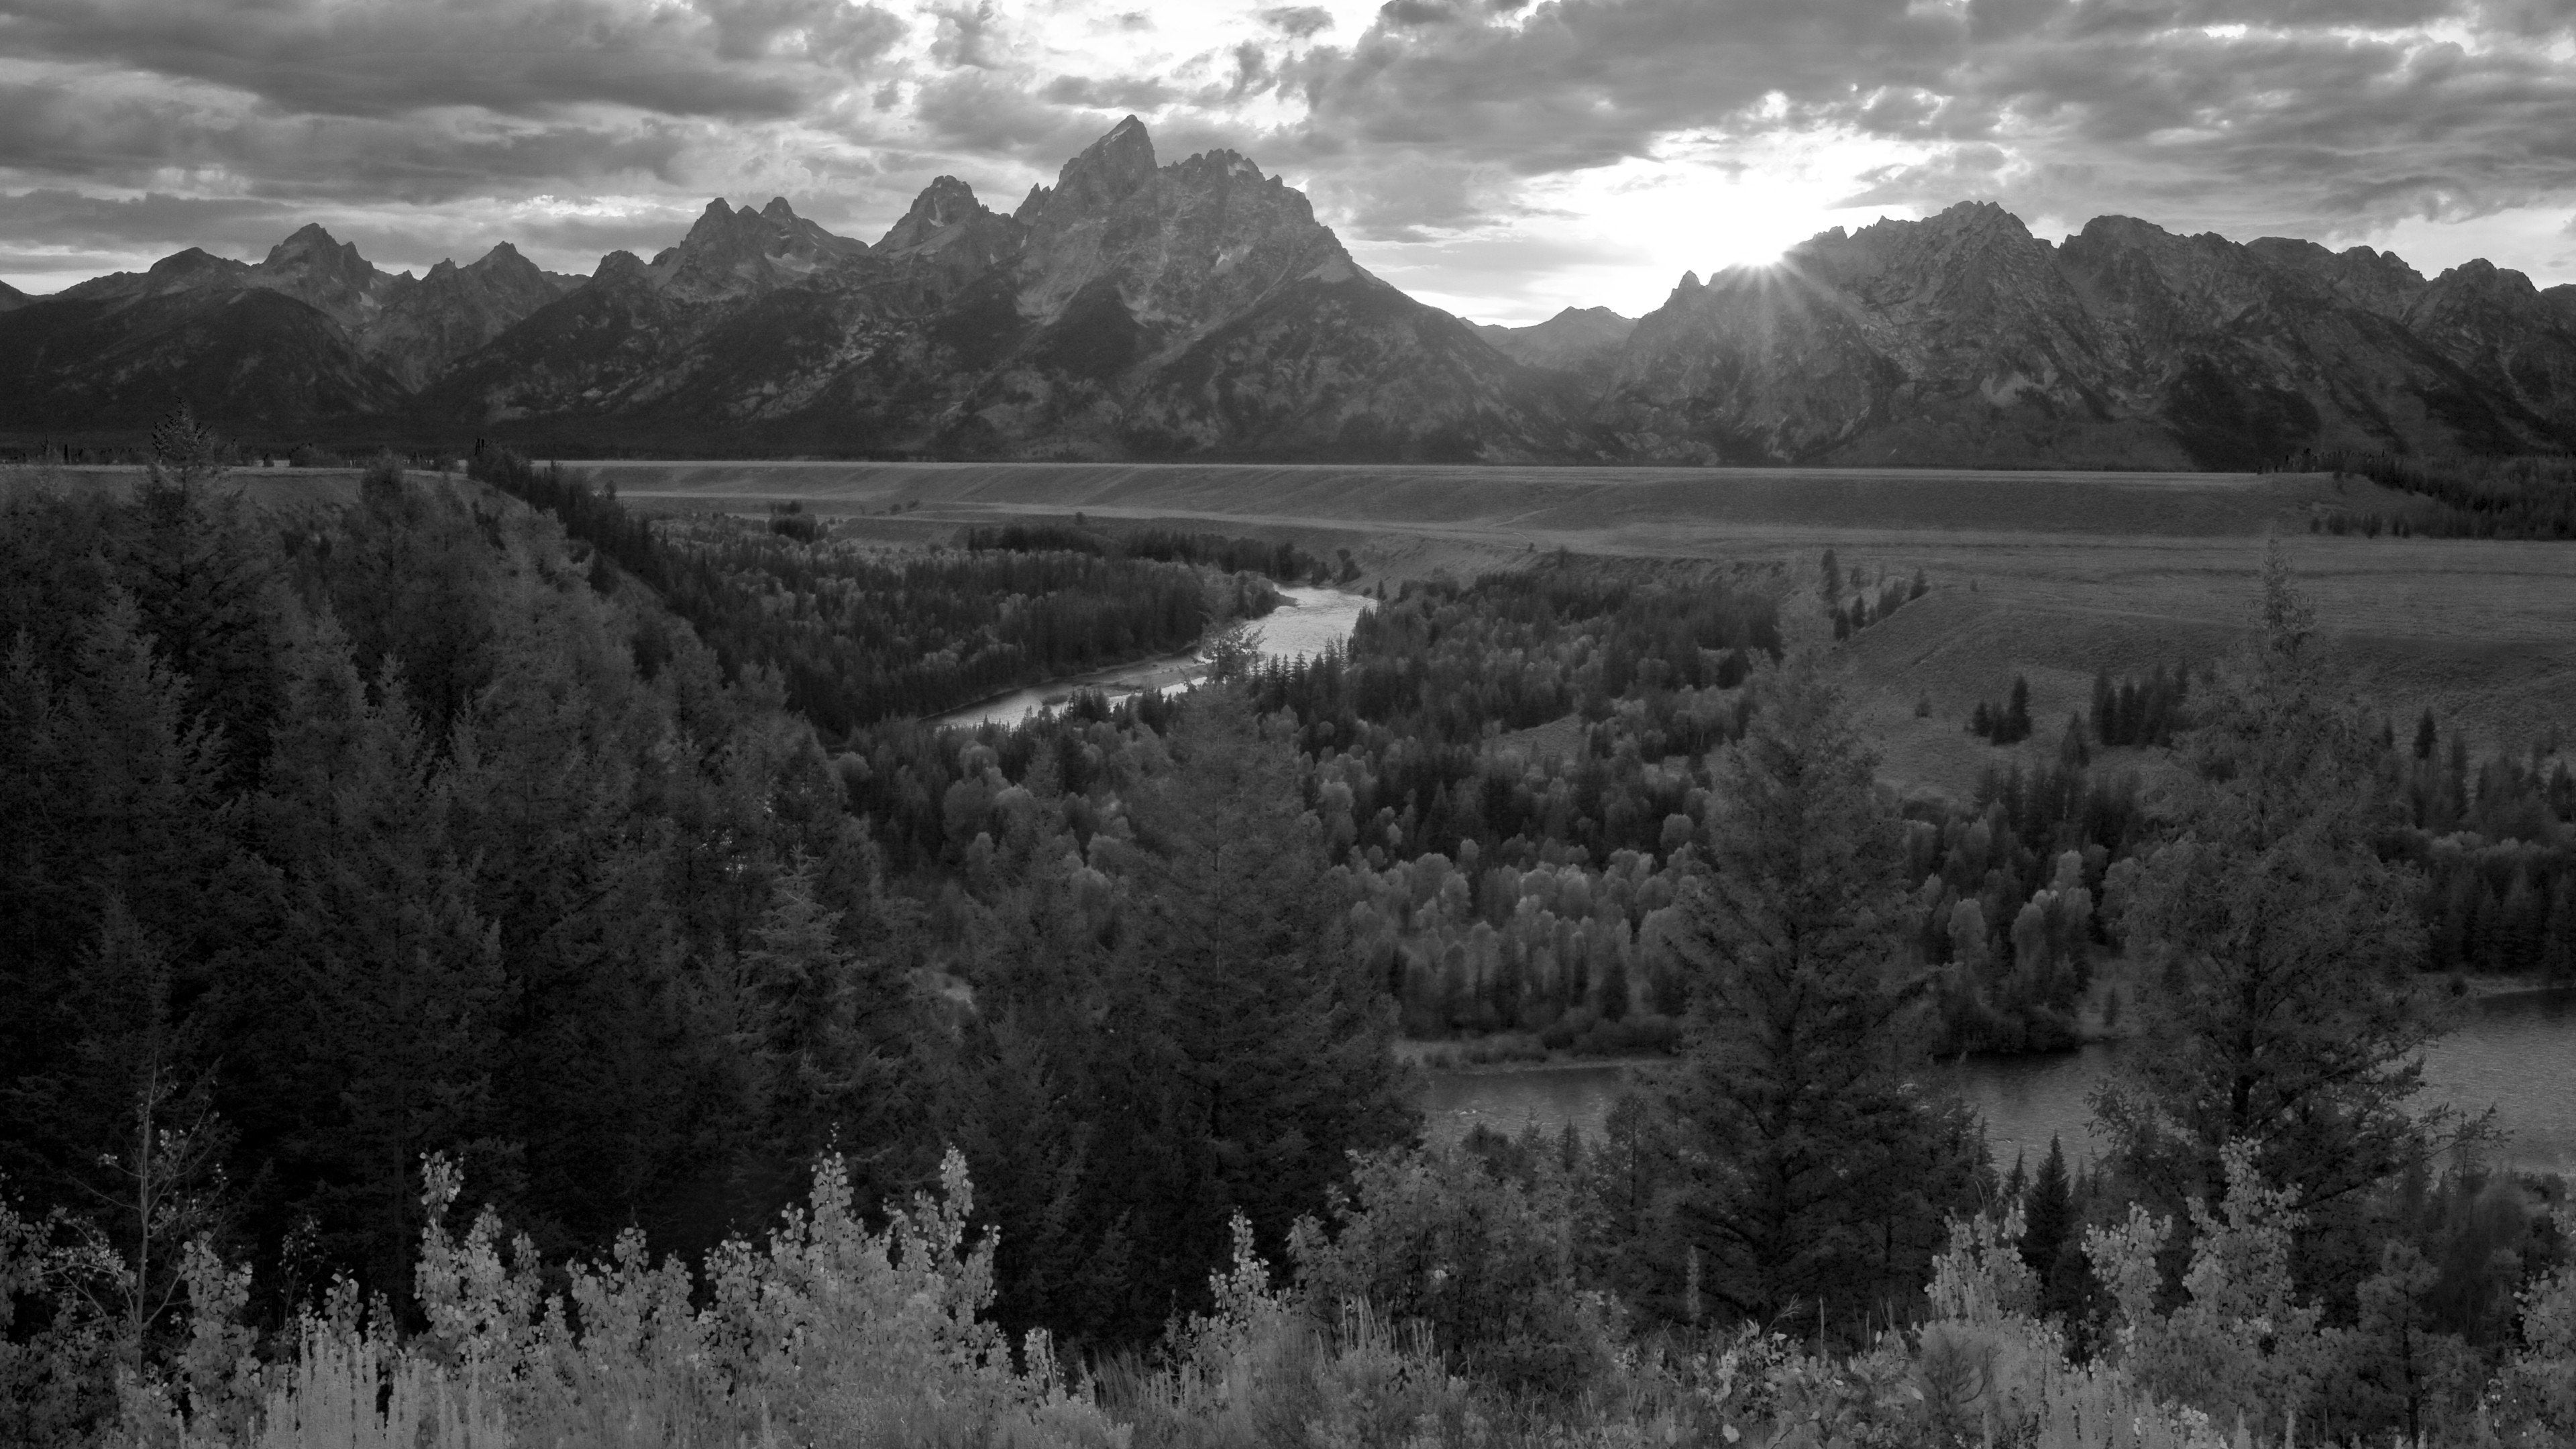 I felt VERY small standing in the same place Ansel Adams